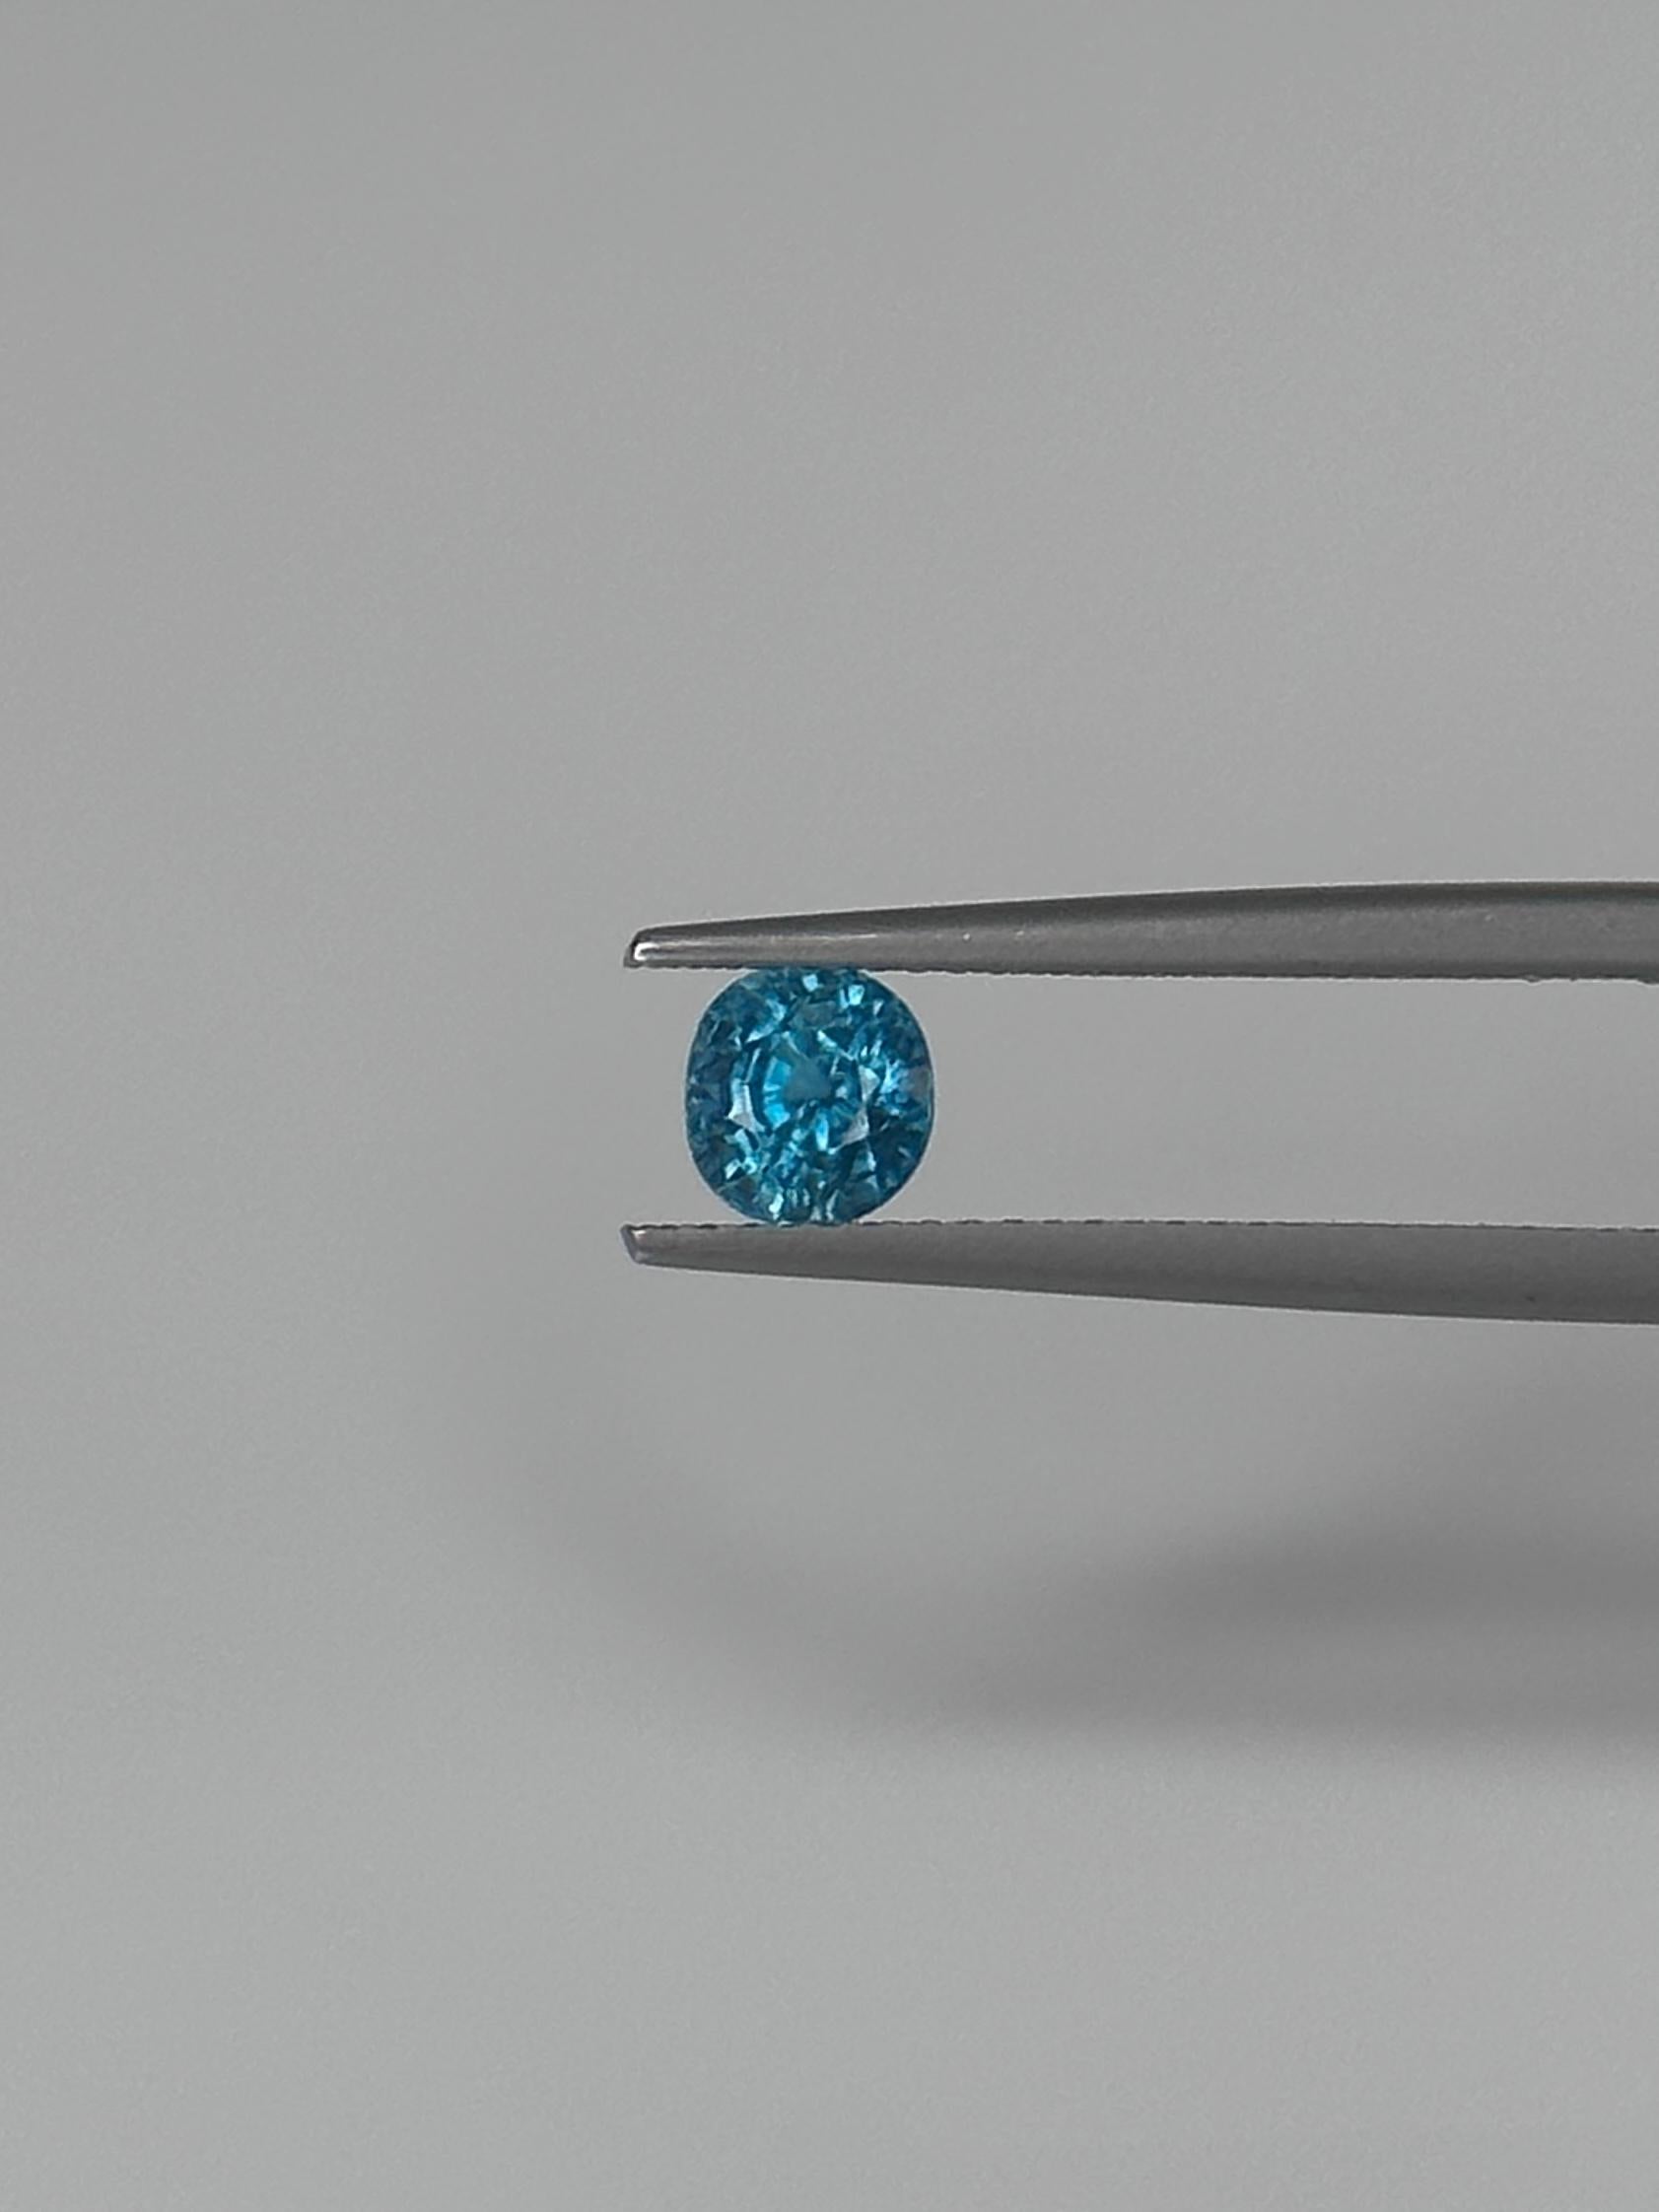 Sparkling Cushion-cut Sky Blue Zircon

This 1.21 carat Blue Zircon has an impressive fire and a pure light blue color. Giving it the 